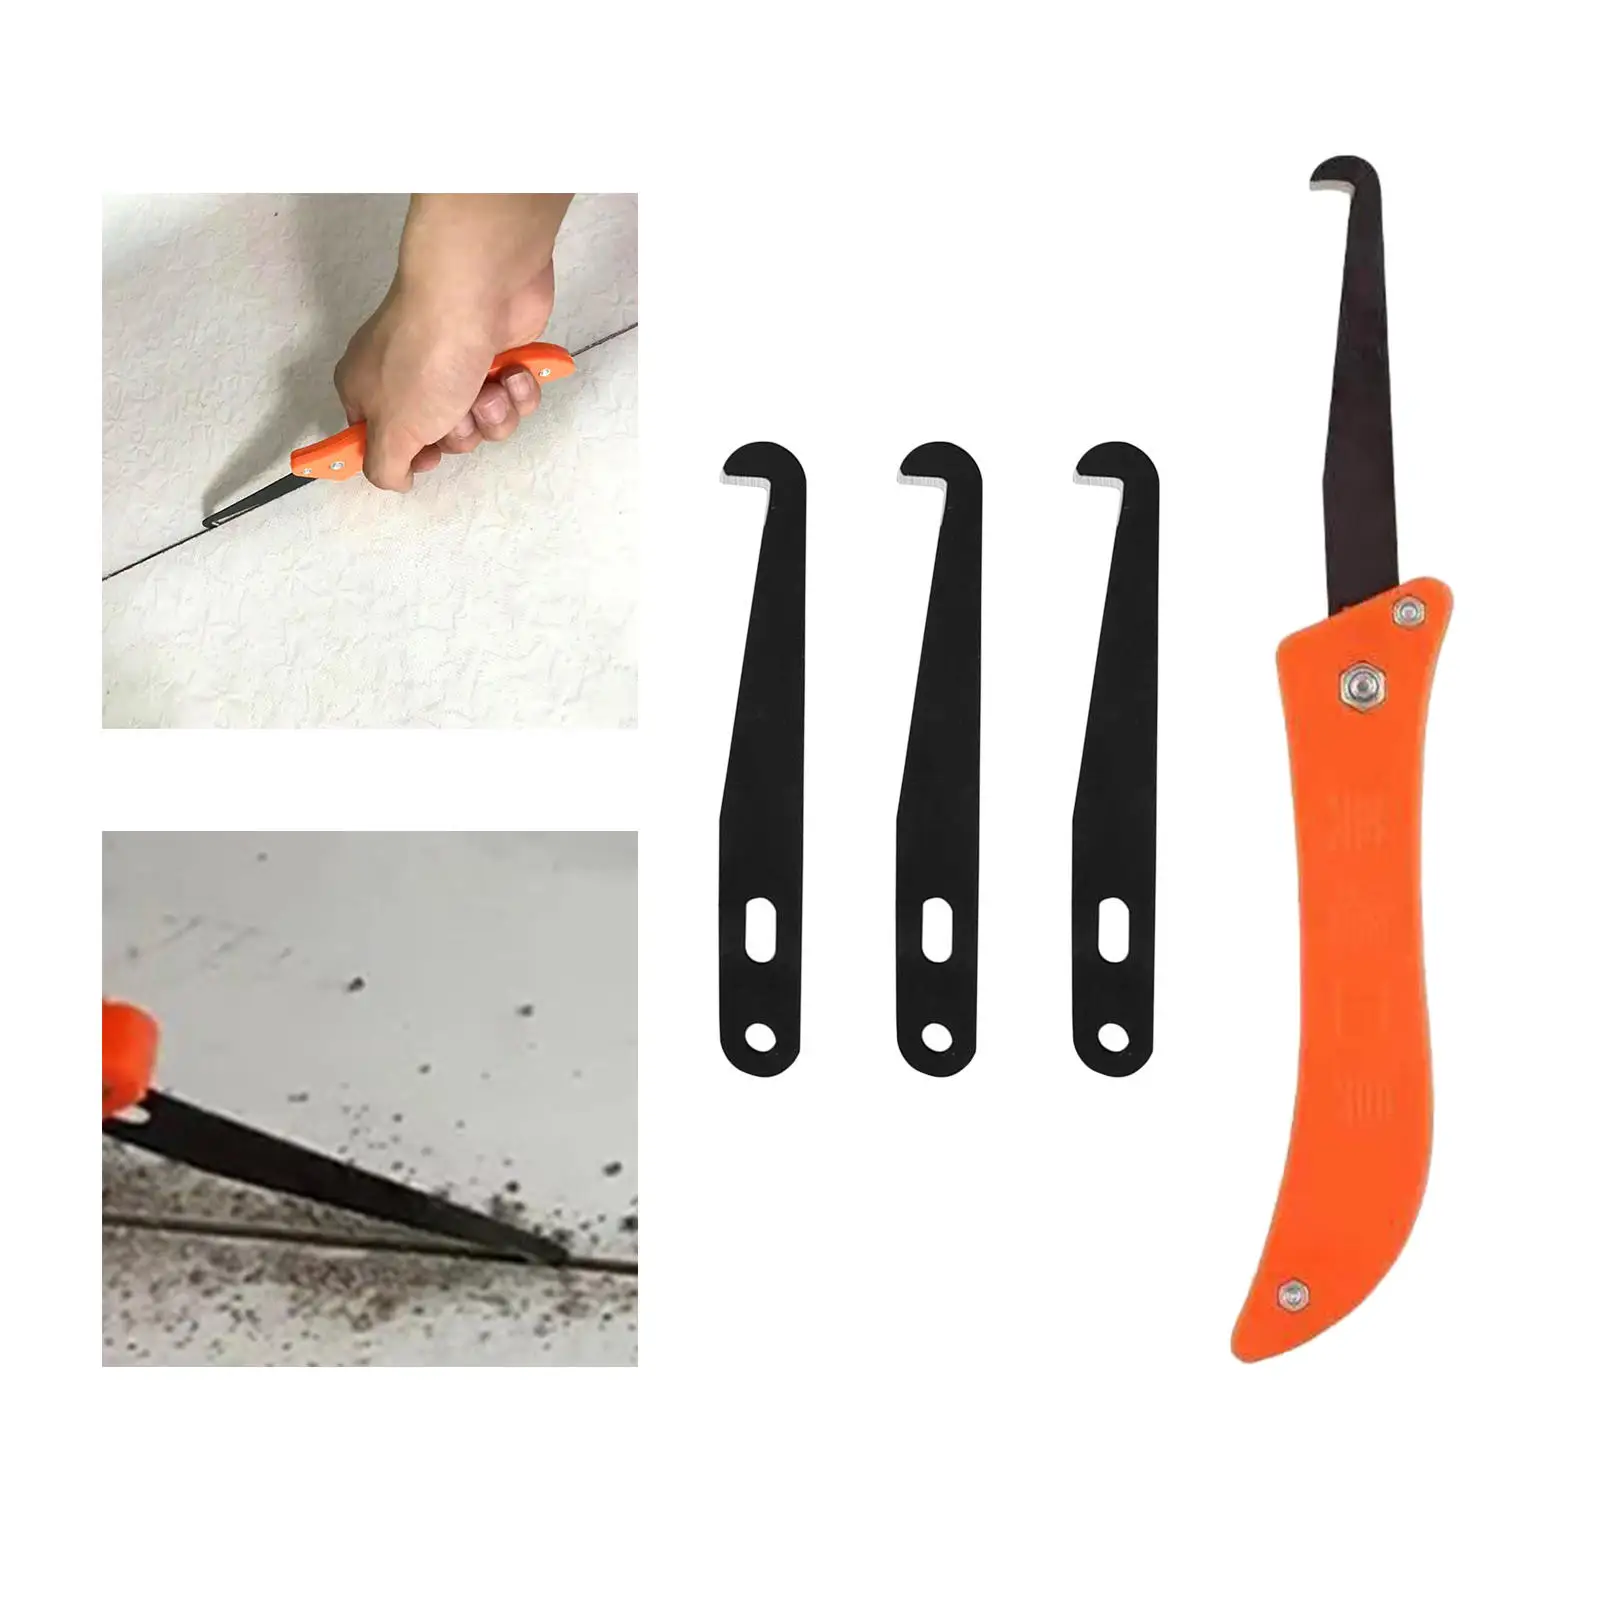 Tile Gap Repair Tool Hook Knife Professional Cleaning and Removal of Old Grout Hand Tools